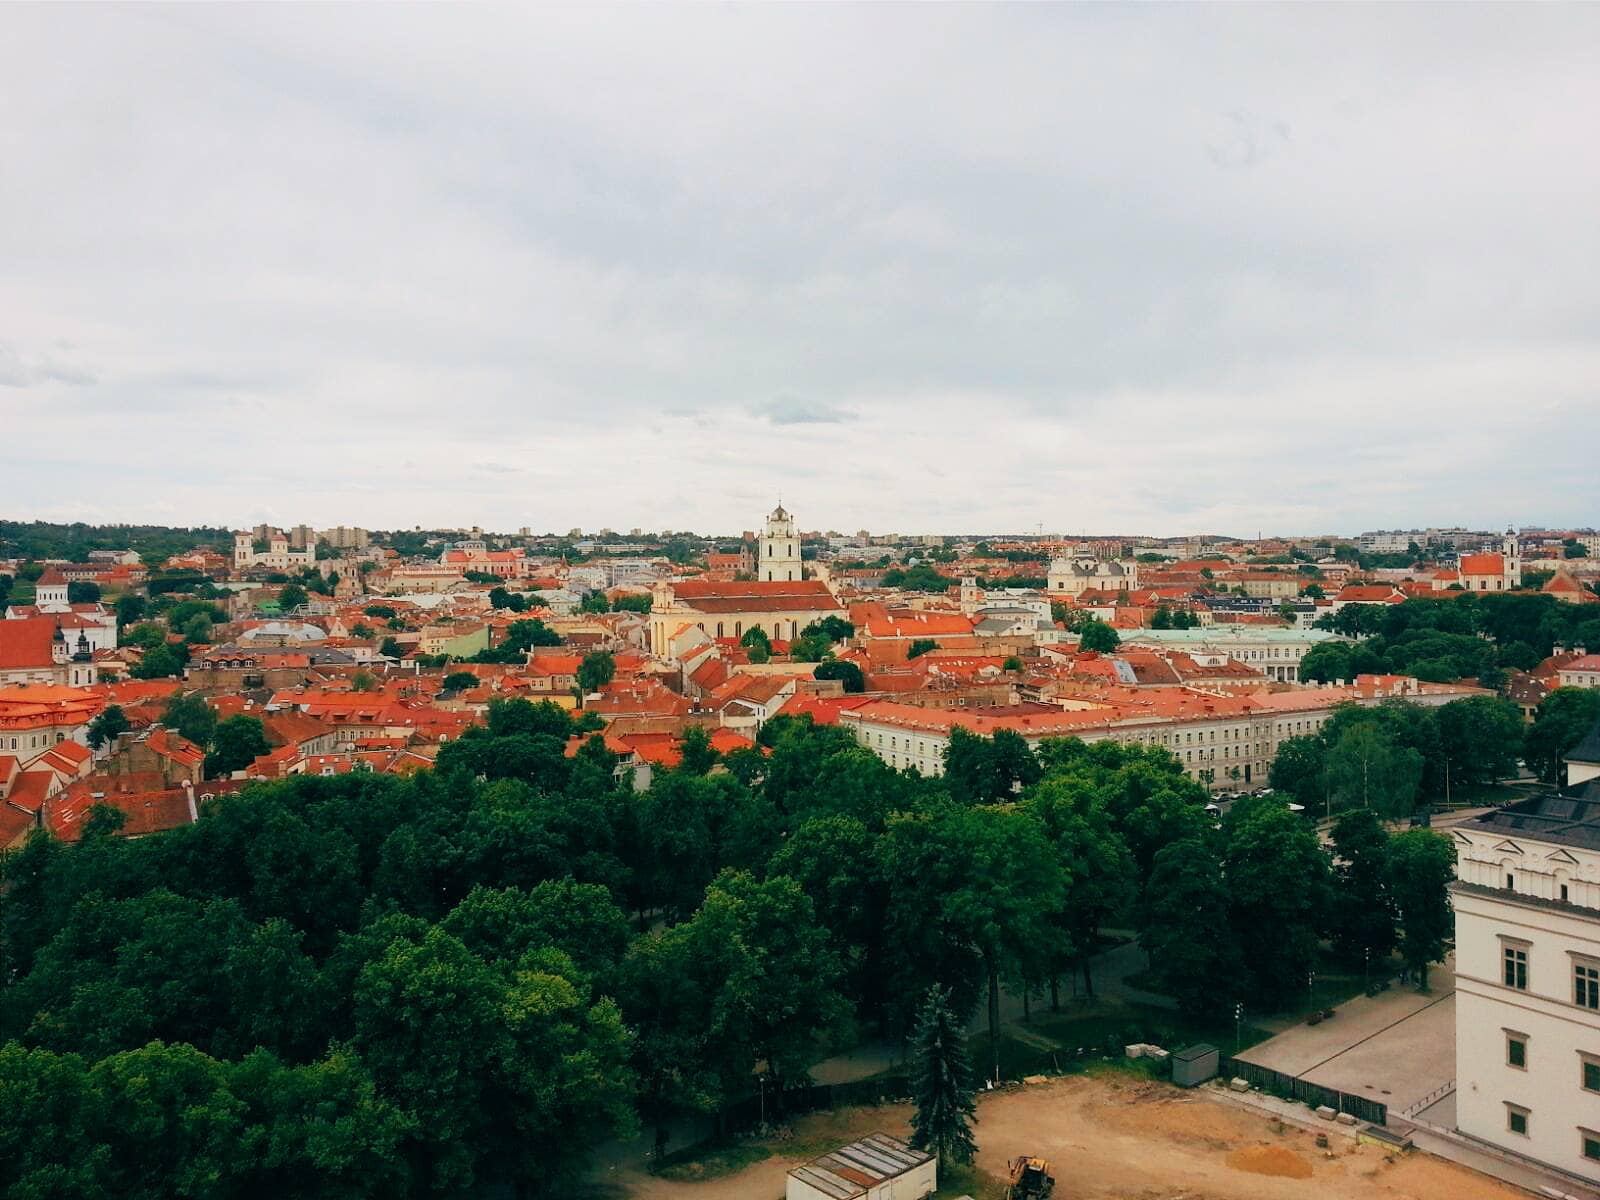 Vilnius, Lithuania was my first stop for this trip. 